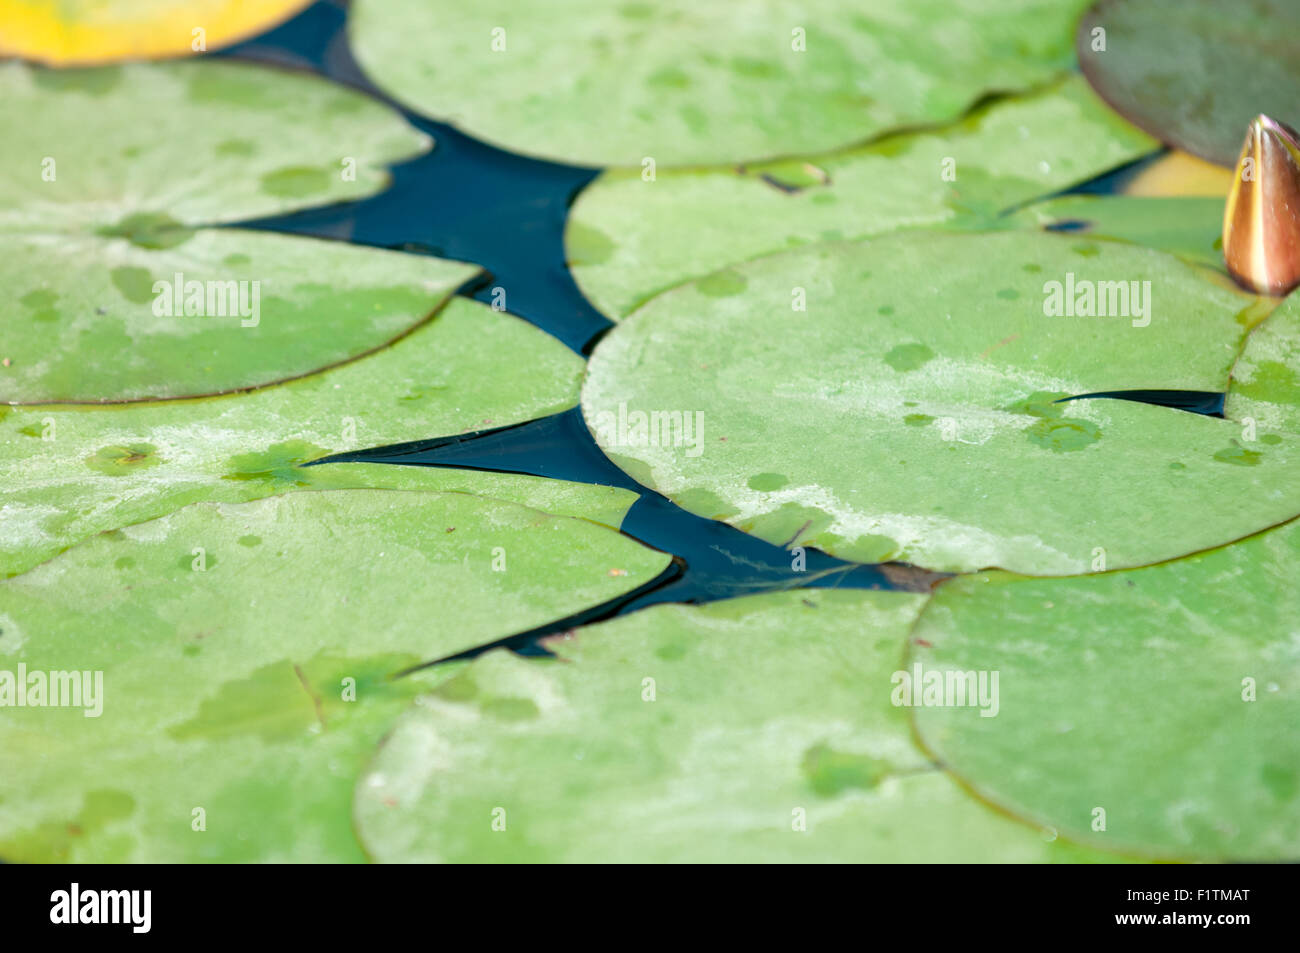 Close up of green lily pads on a pond Stock Photo